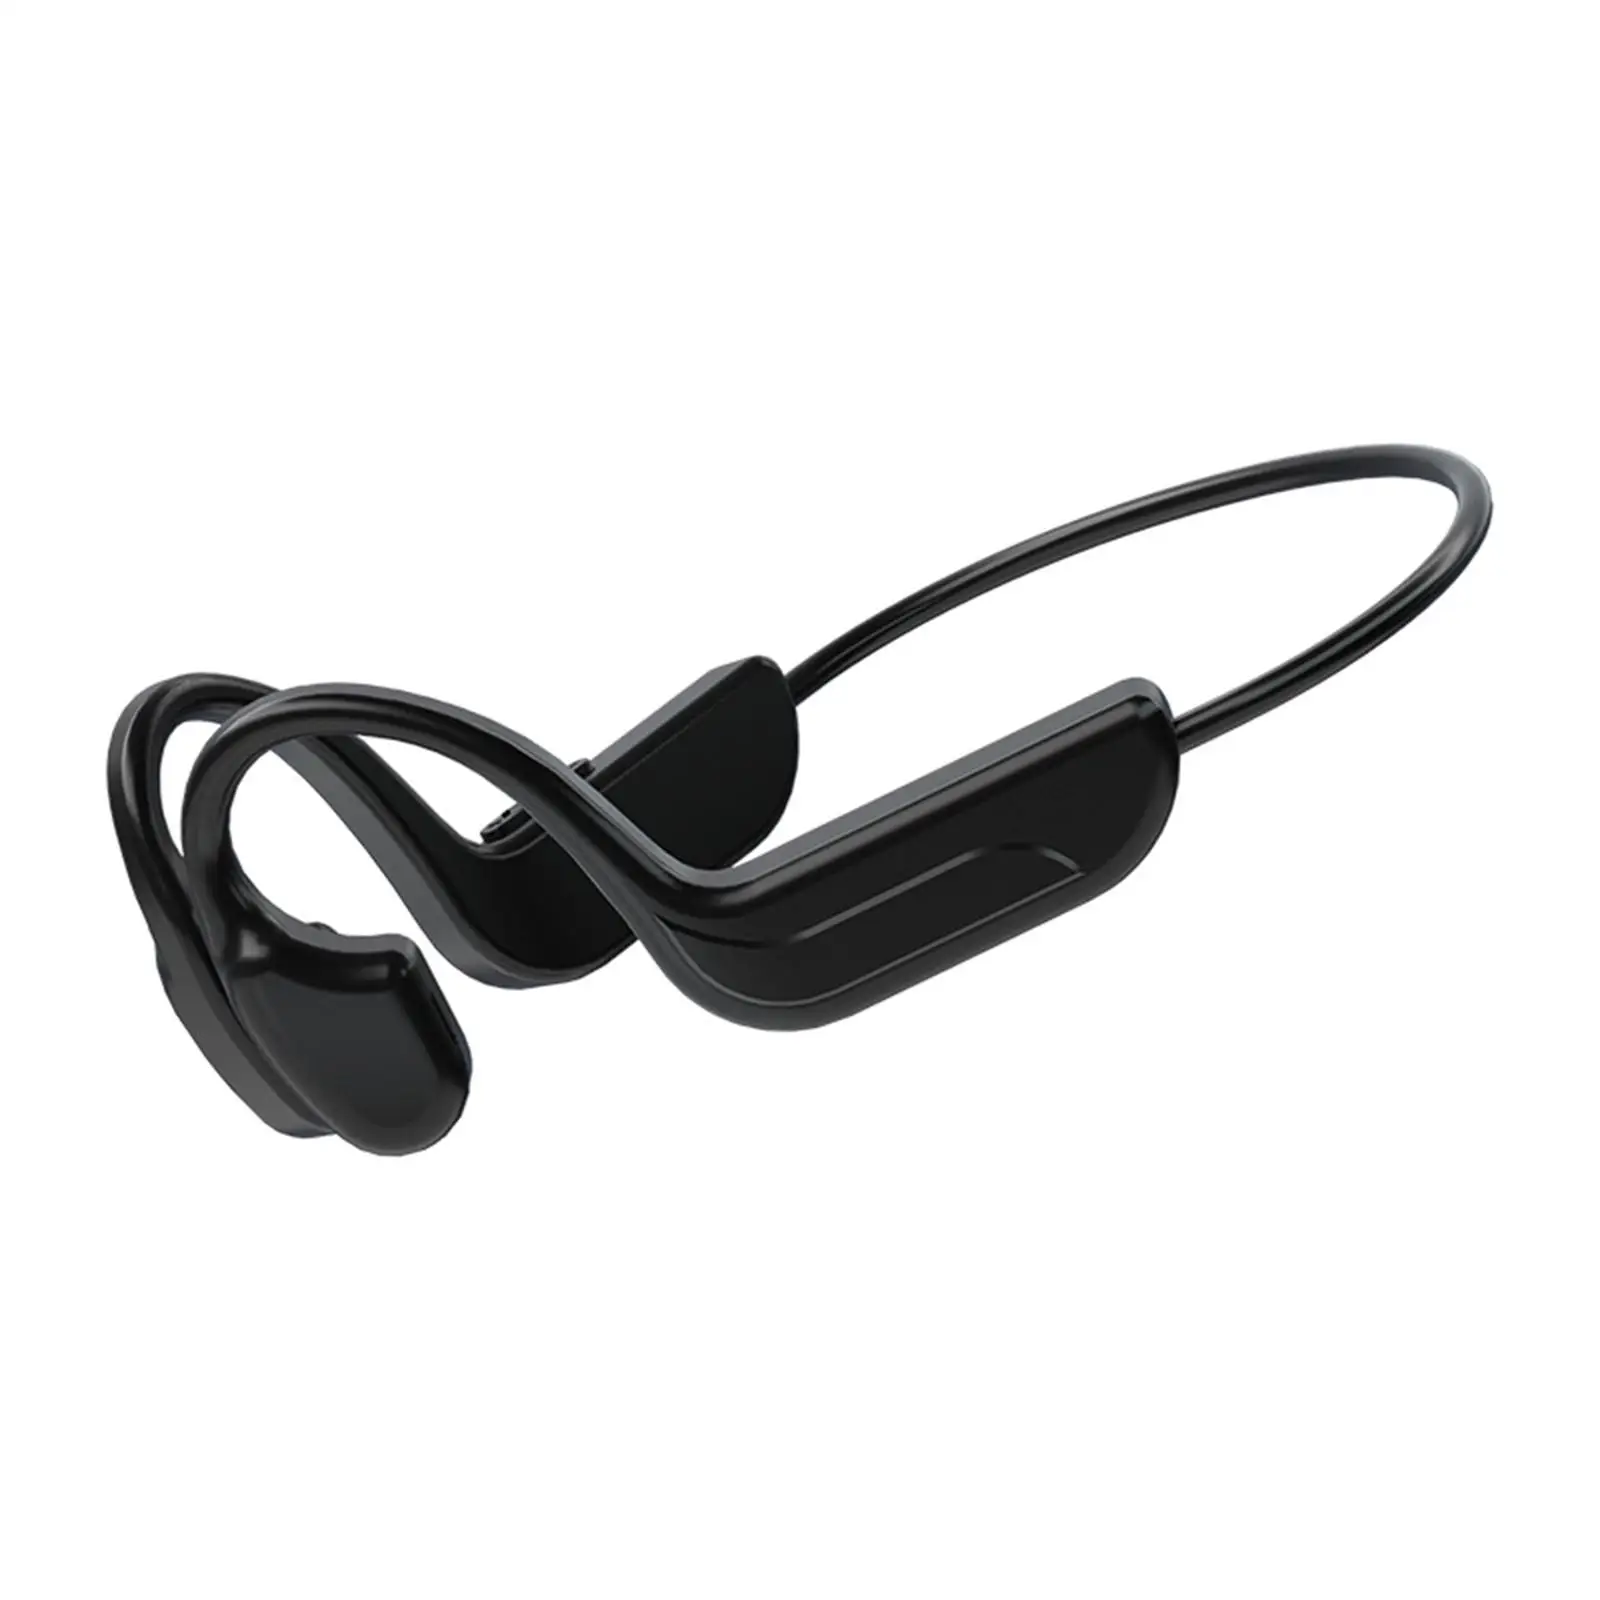 Bone Conduction Headphones Bluetooth 5.0 W/ Noise Cancelling Mic Waterproof Headset for Workout Swimming Cycling Hiking Sports